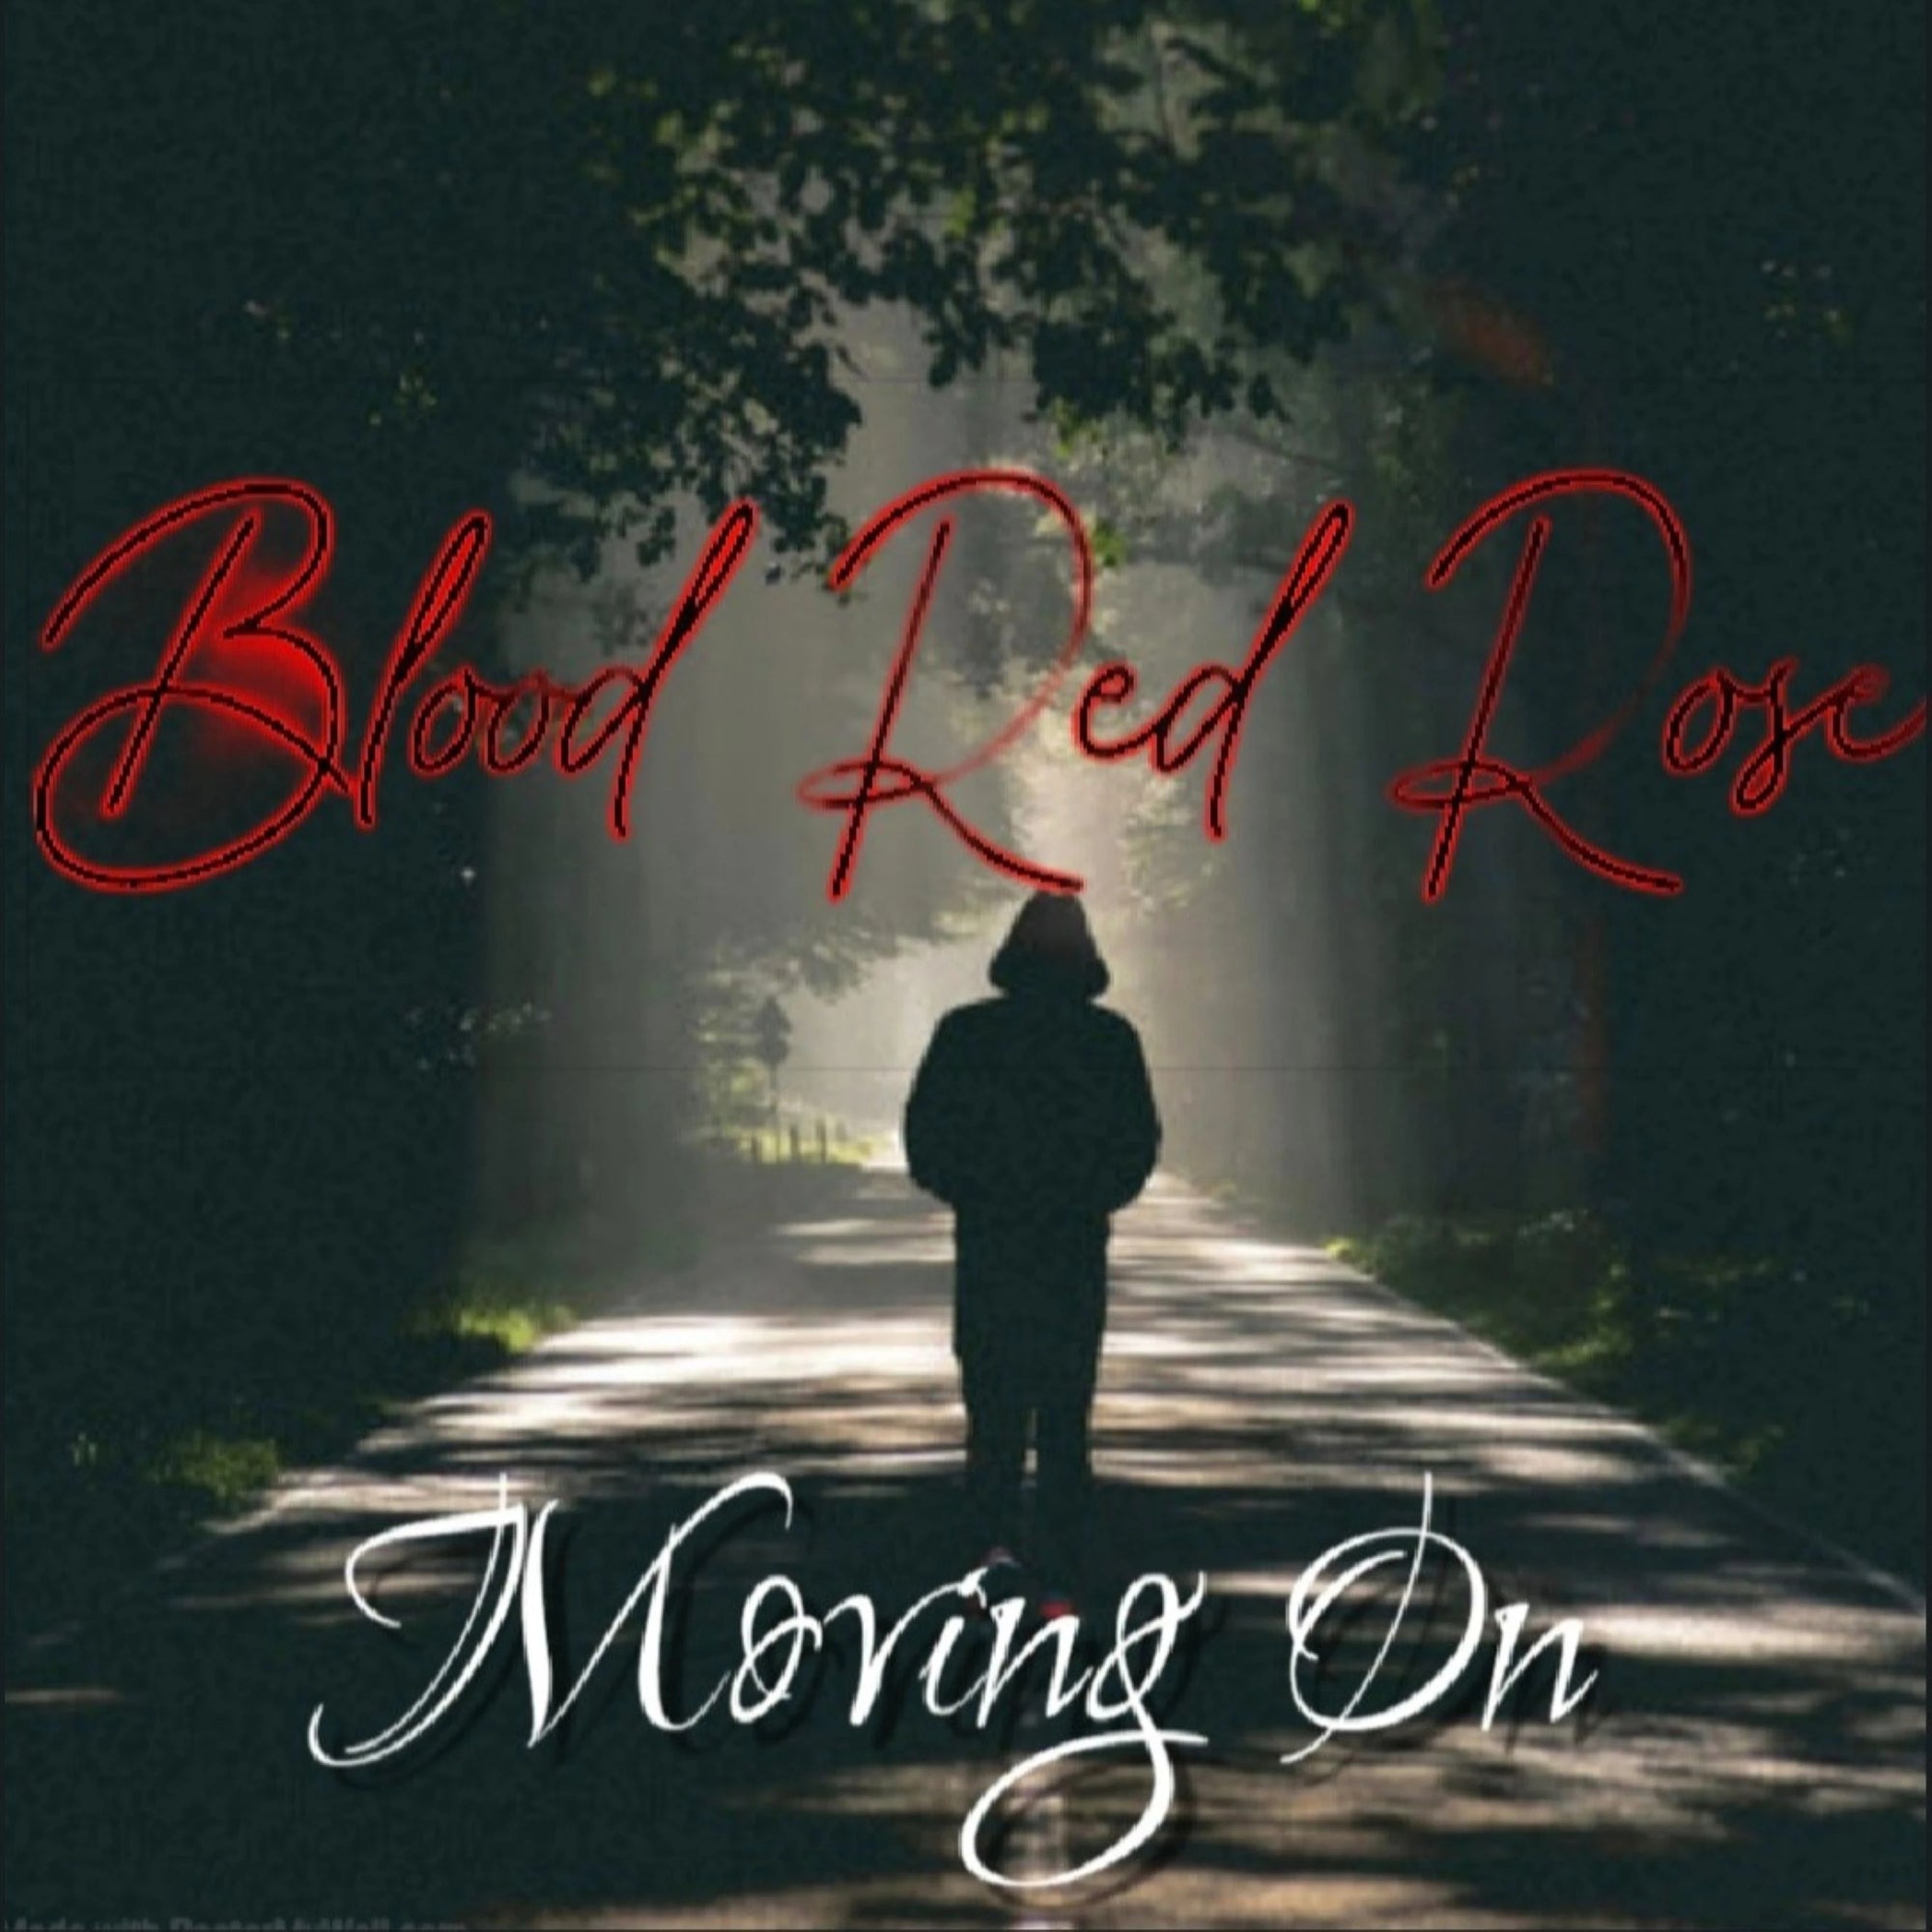 Blood Red Rose – ‘Moving On’